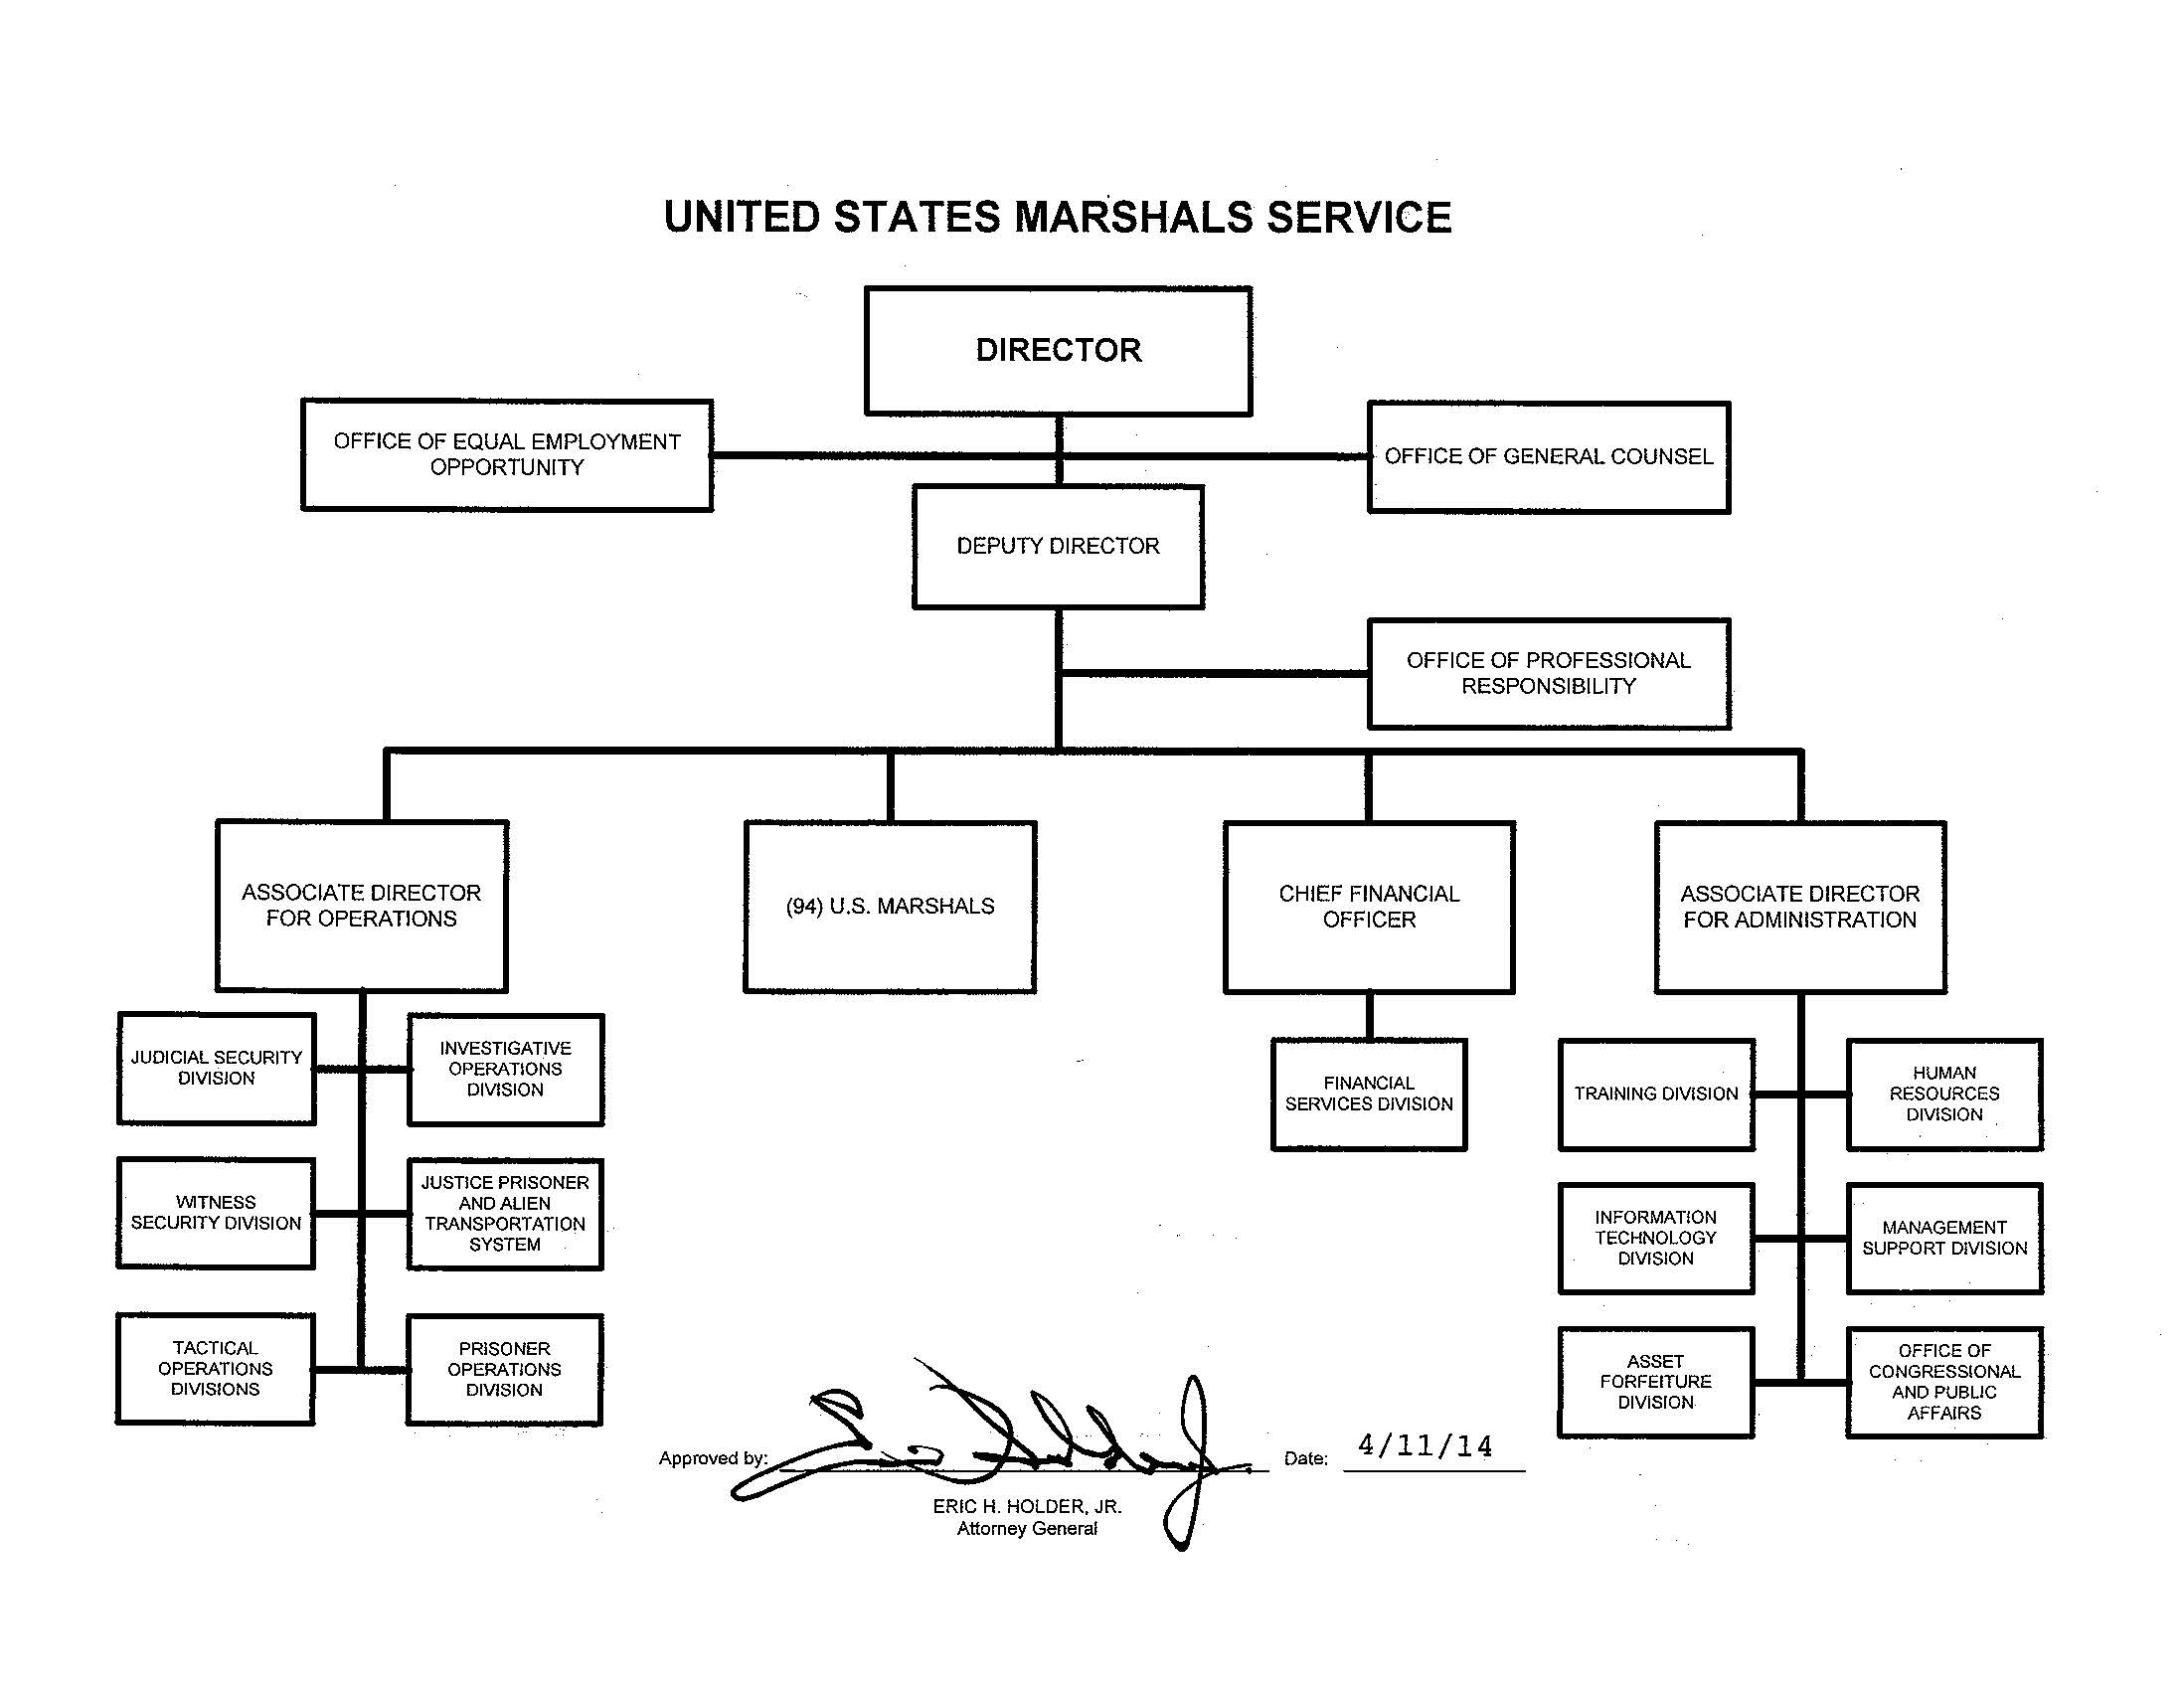 Organization, Mission and Functions Manual: United States Marshals